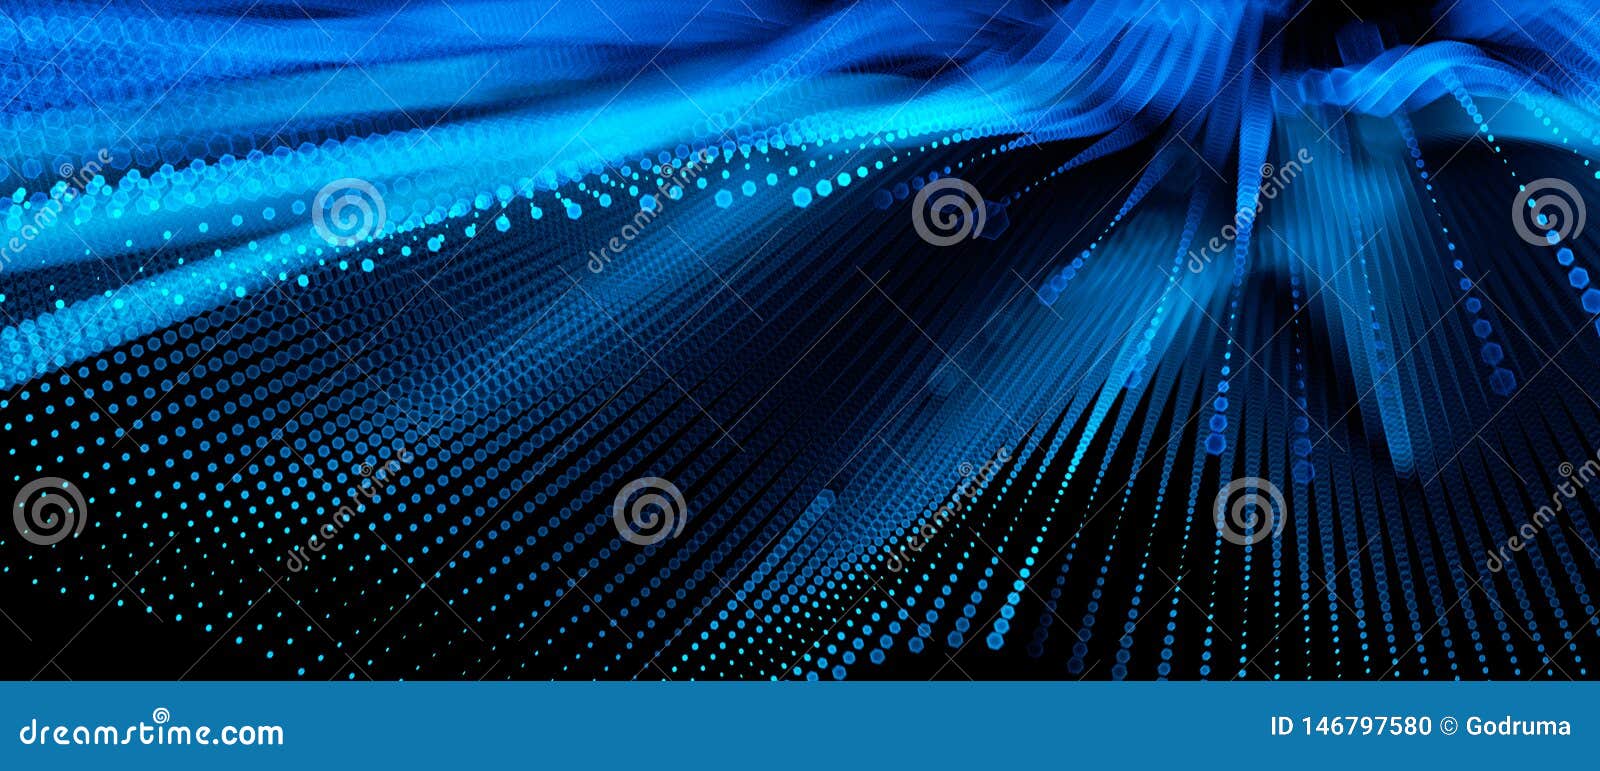 abstract big data futuristic light wallpaper background . science dark pattern with structure mesh and circles